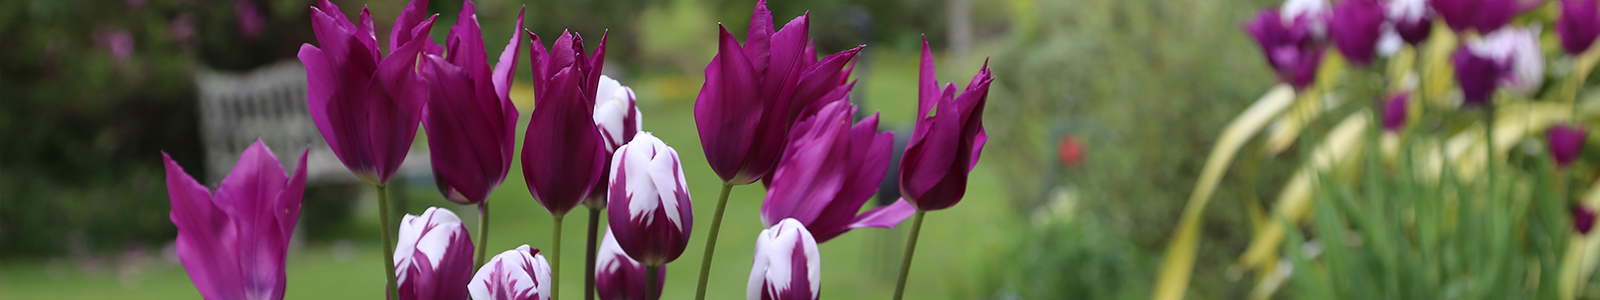 Tulips page banner